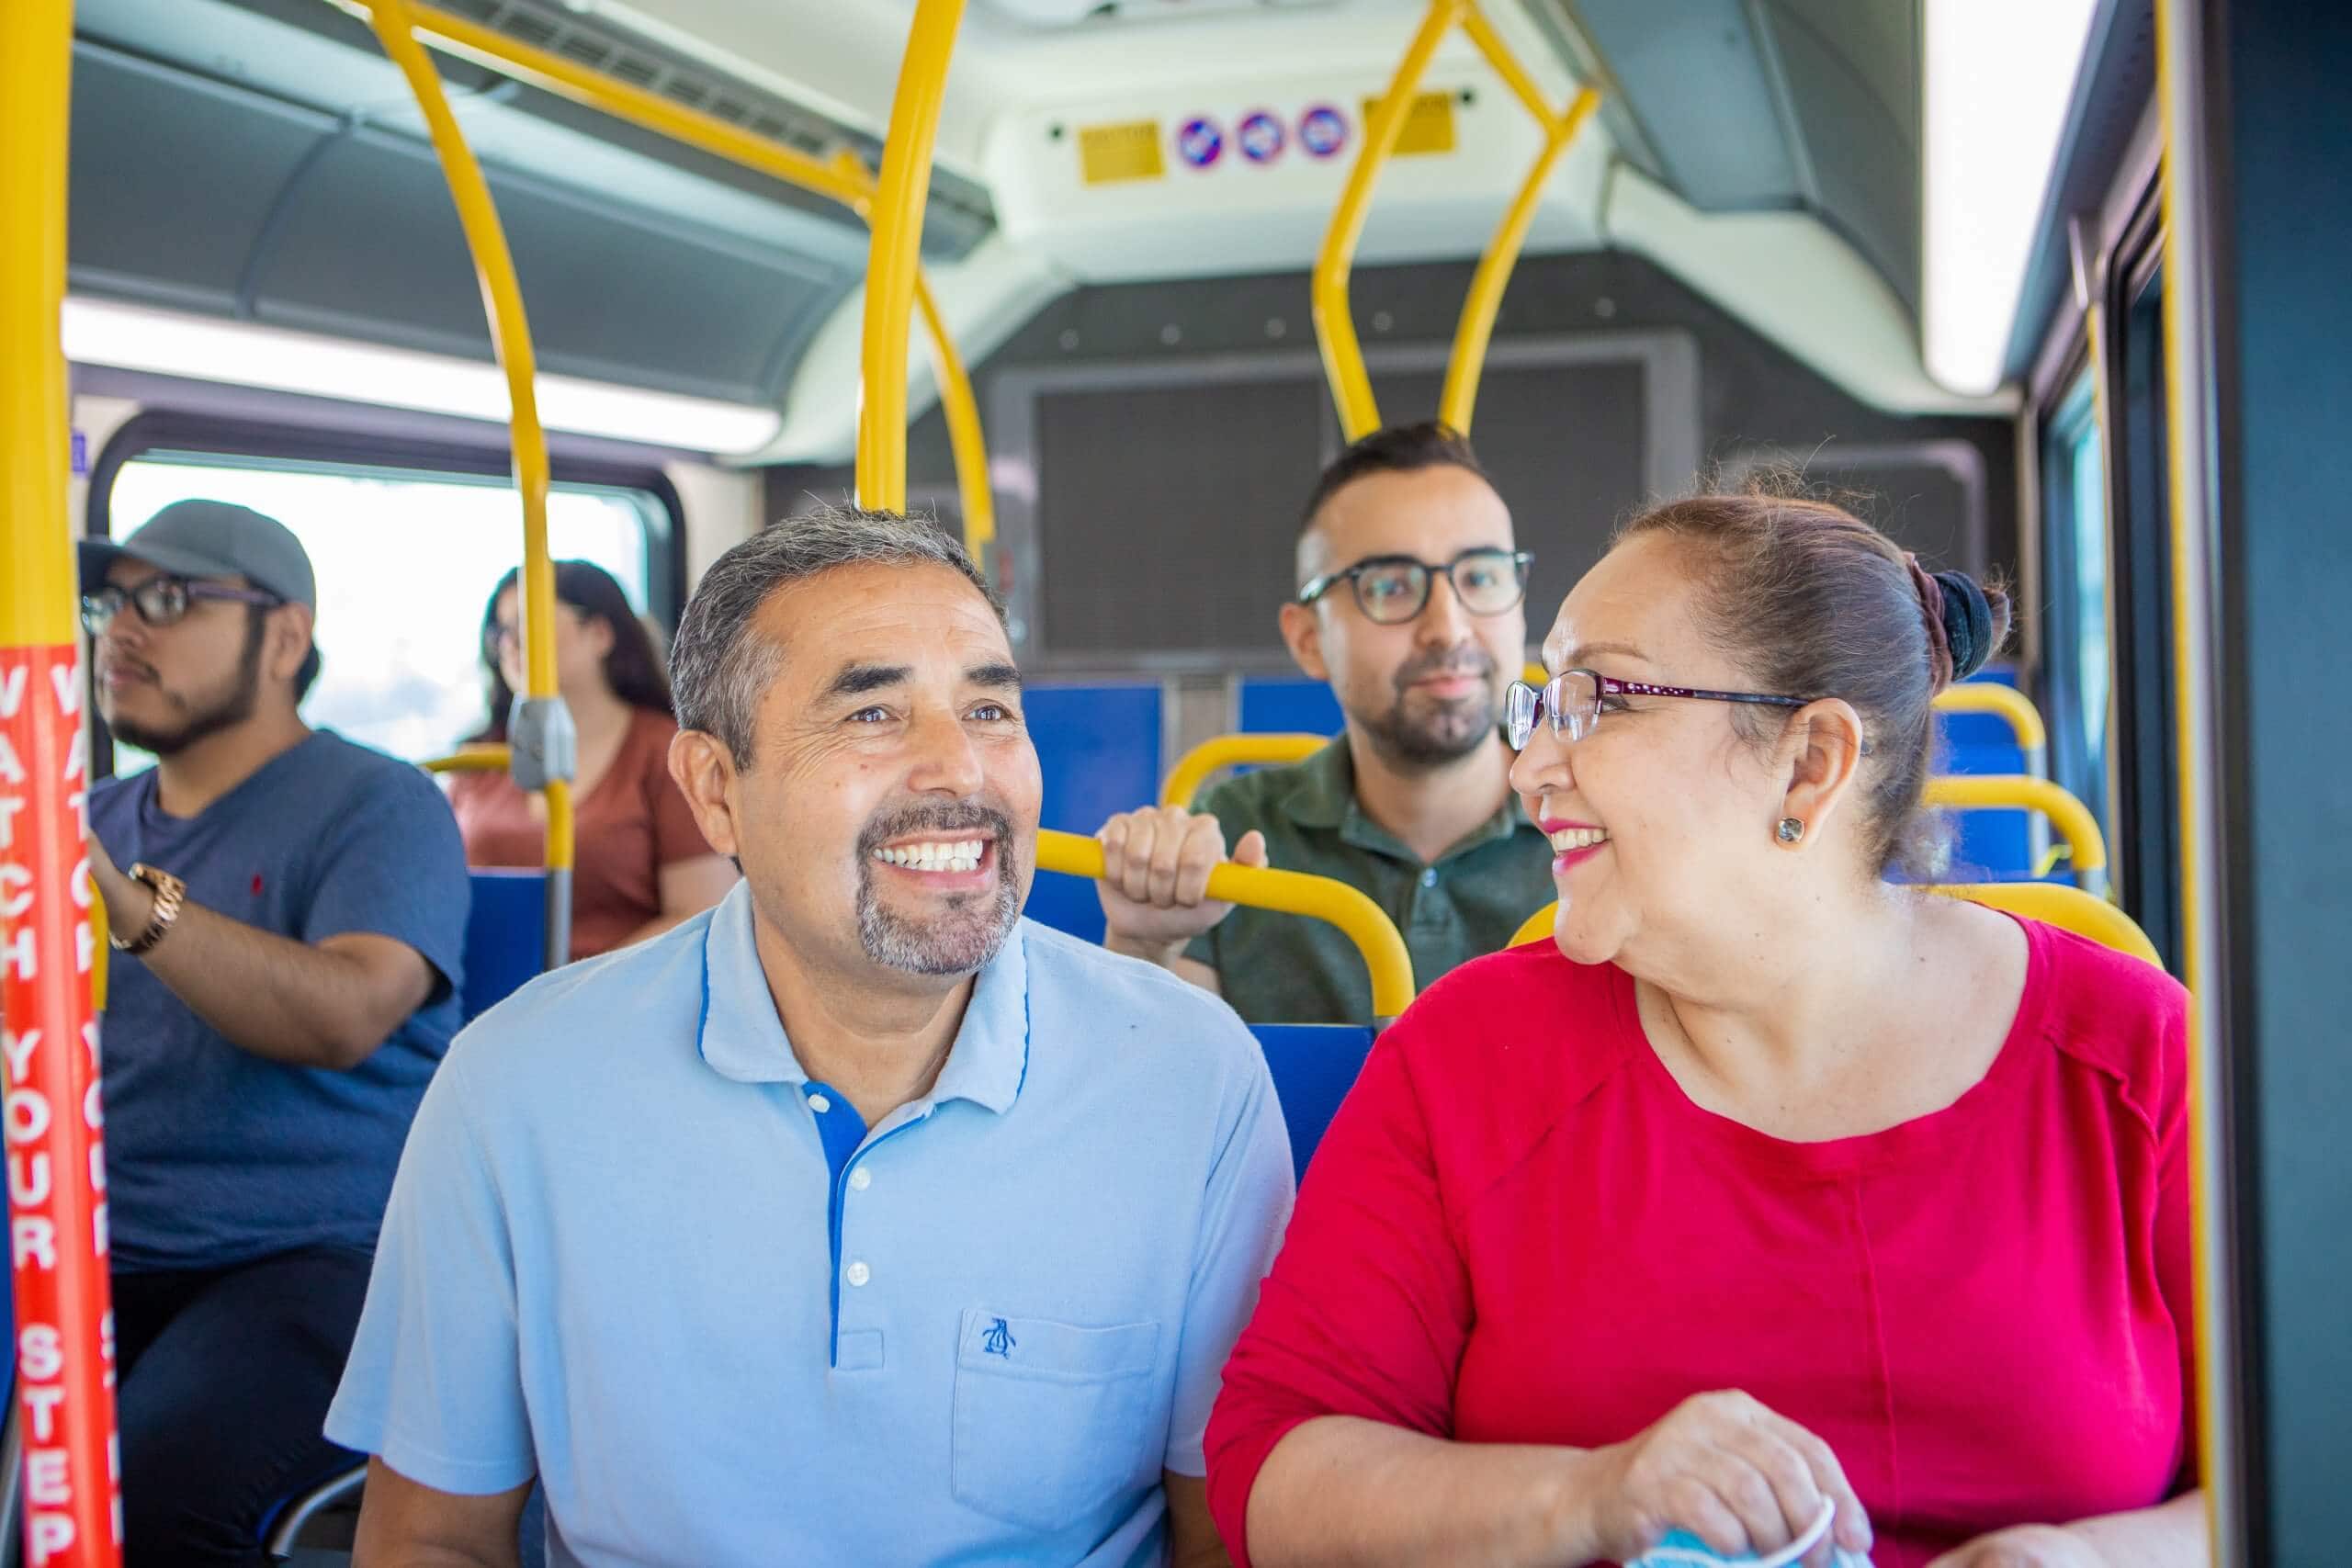 Smiling customers on bus